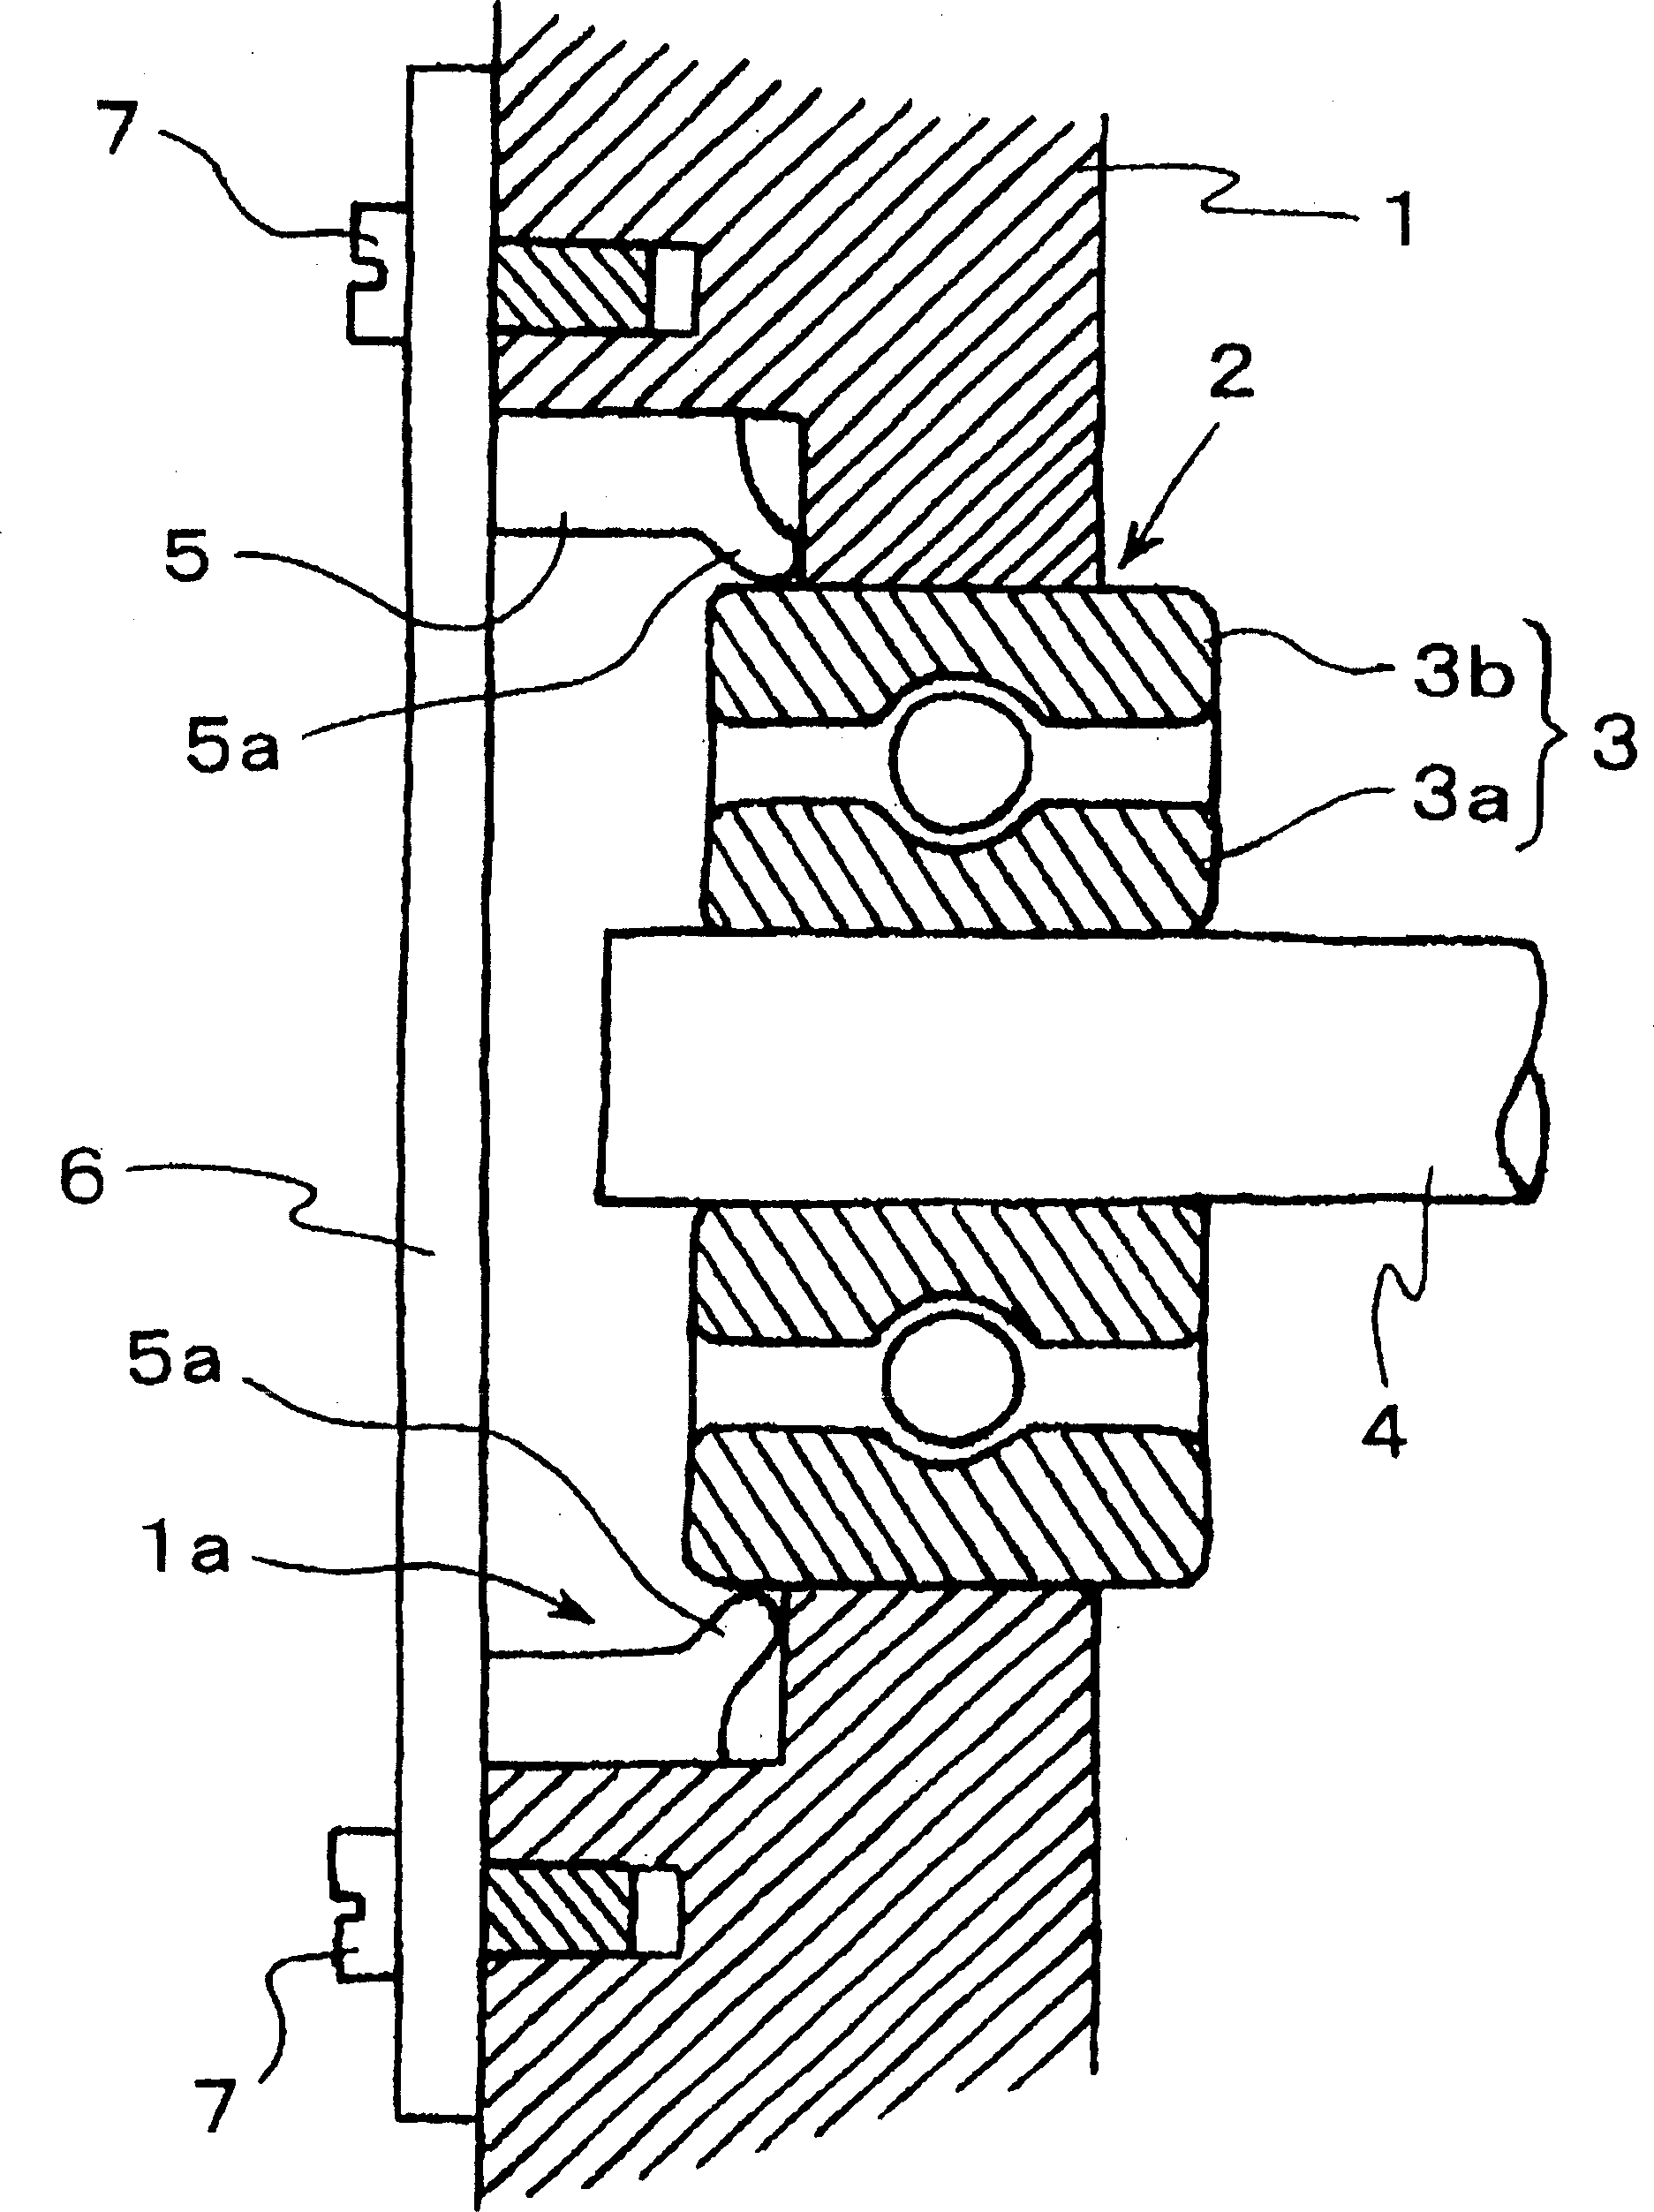 Sewing machine rotary shaft supporting device